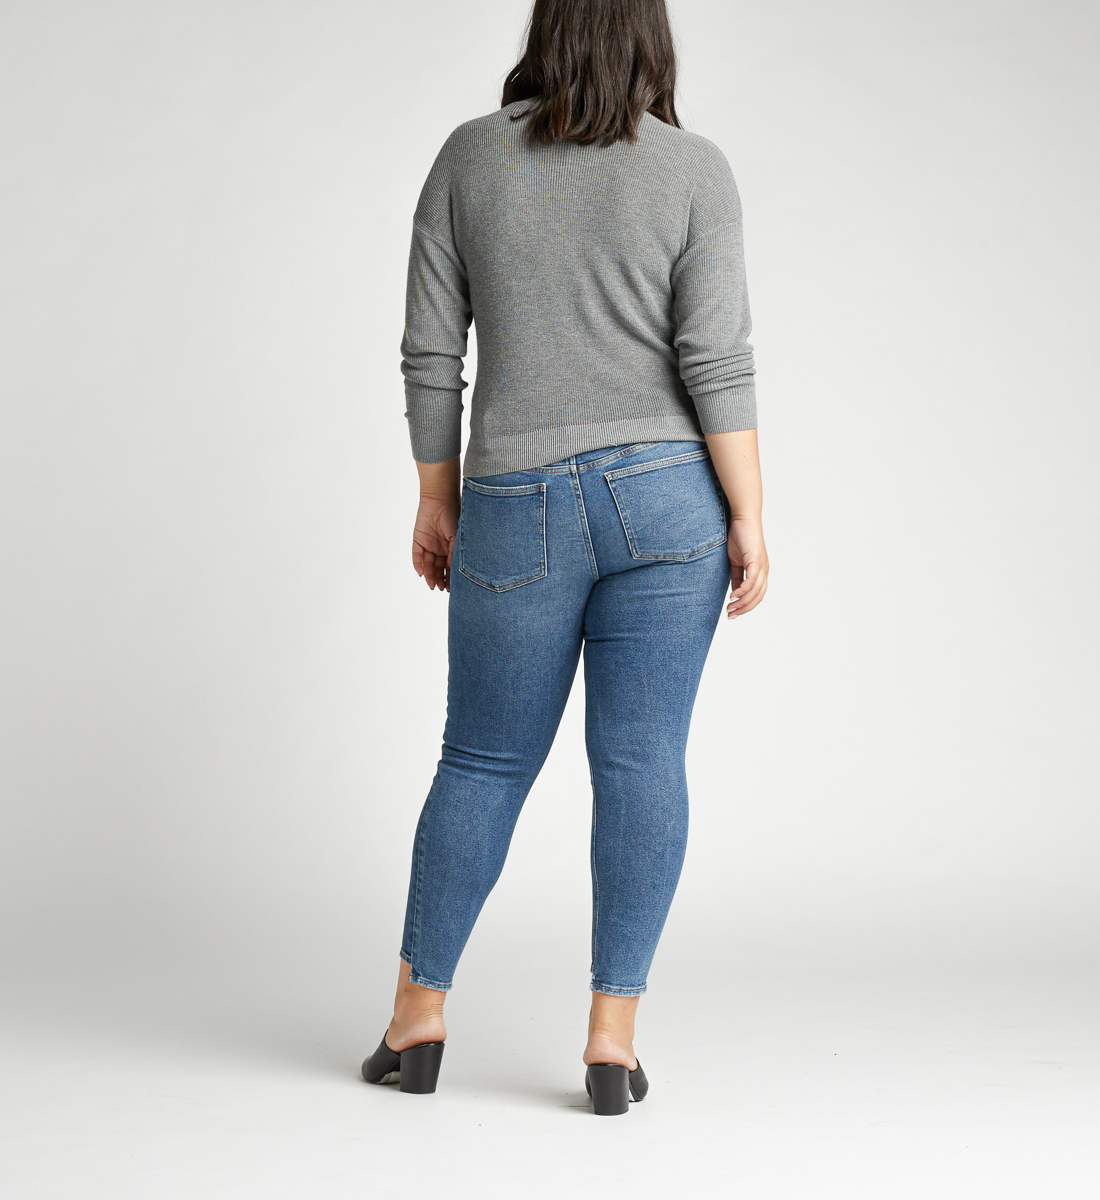 Most Wanted Mid Rise Skinny Plus Size Jeans - Silver Jeans US